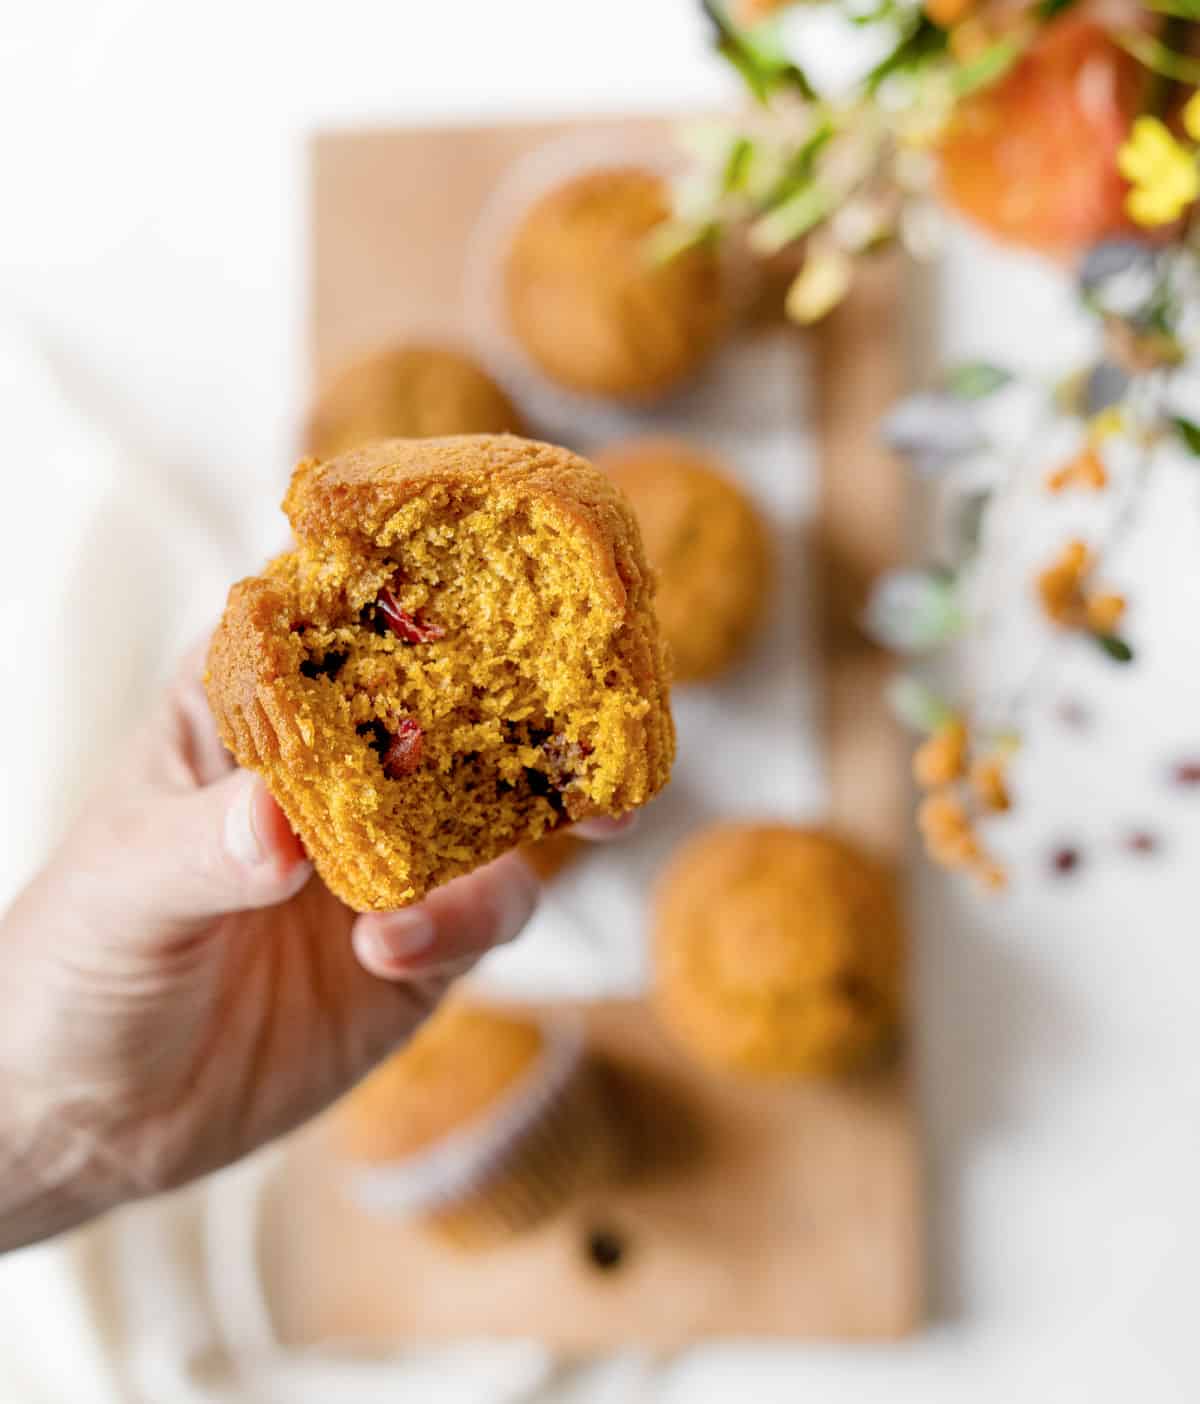 Hand holding eaten pumpkin cranberry muffin over blurred board with more muffins and flower arrangement. 